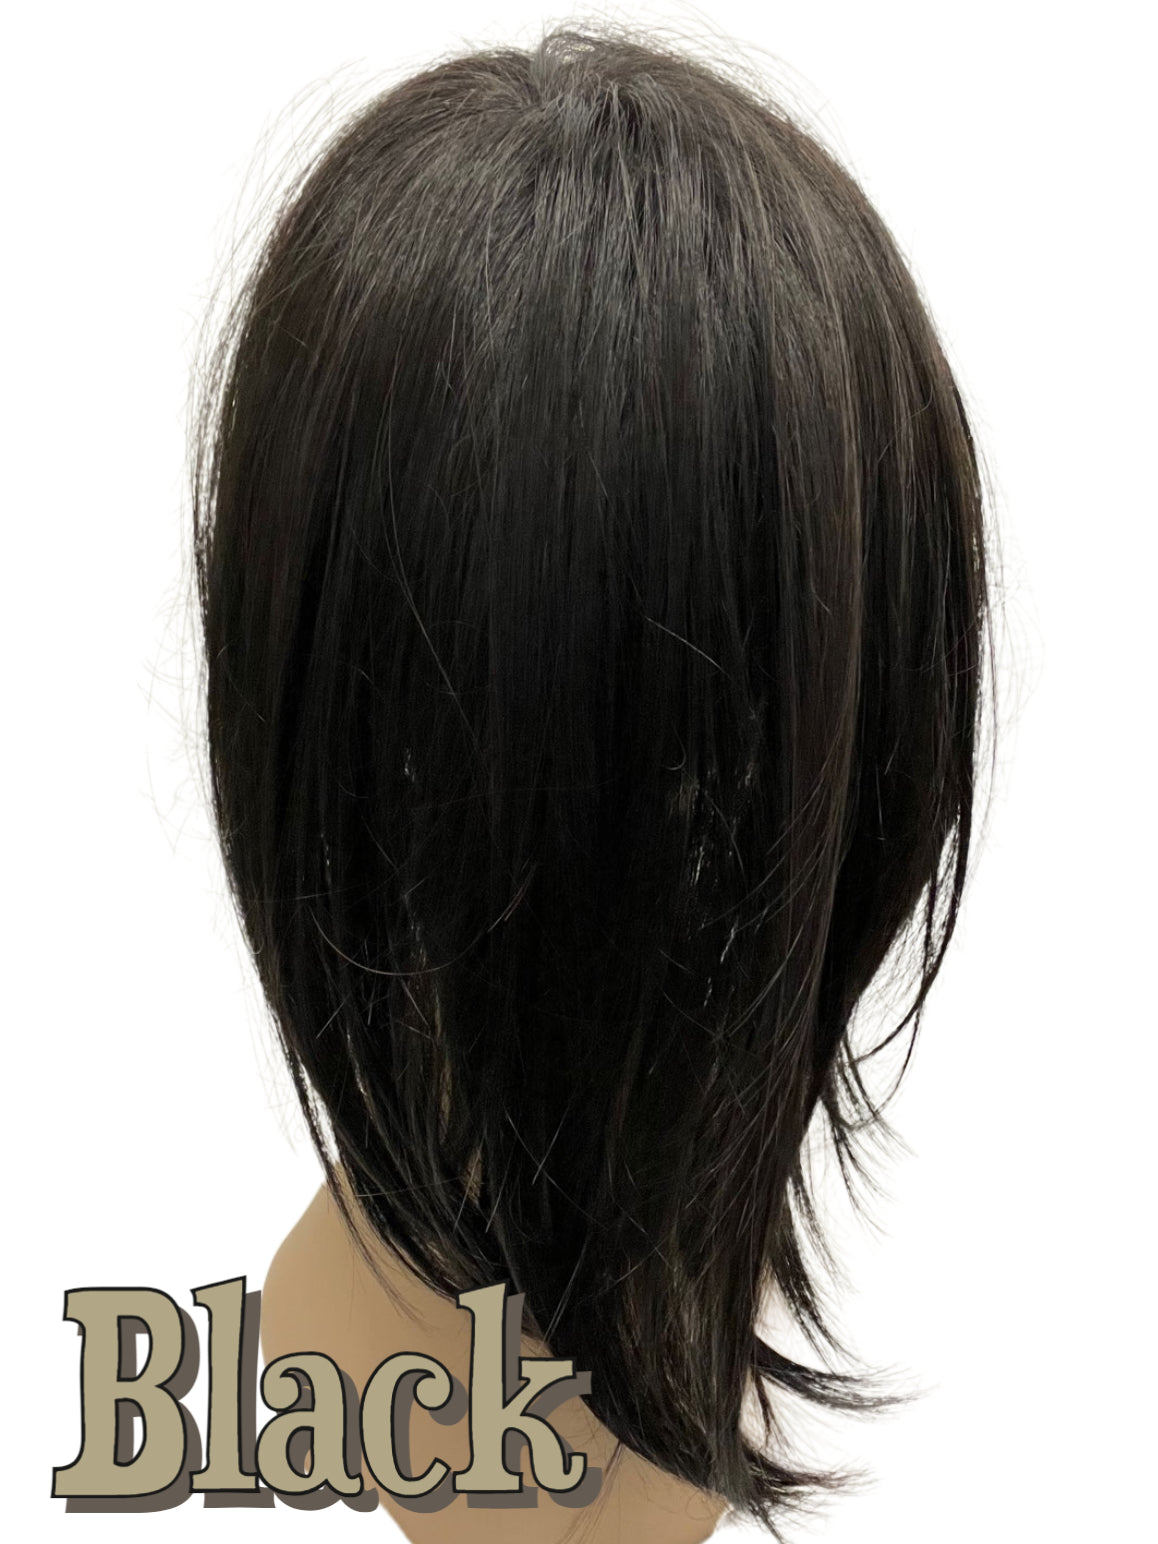 14 Inch Topper Straight LACE FRONT - 40% OFF THIS PRICE NO CODE NEEDED - FINAL SALE